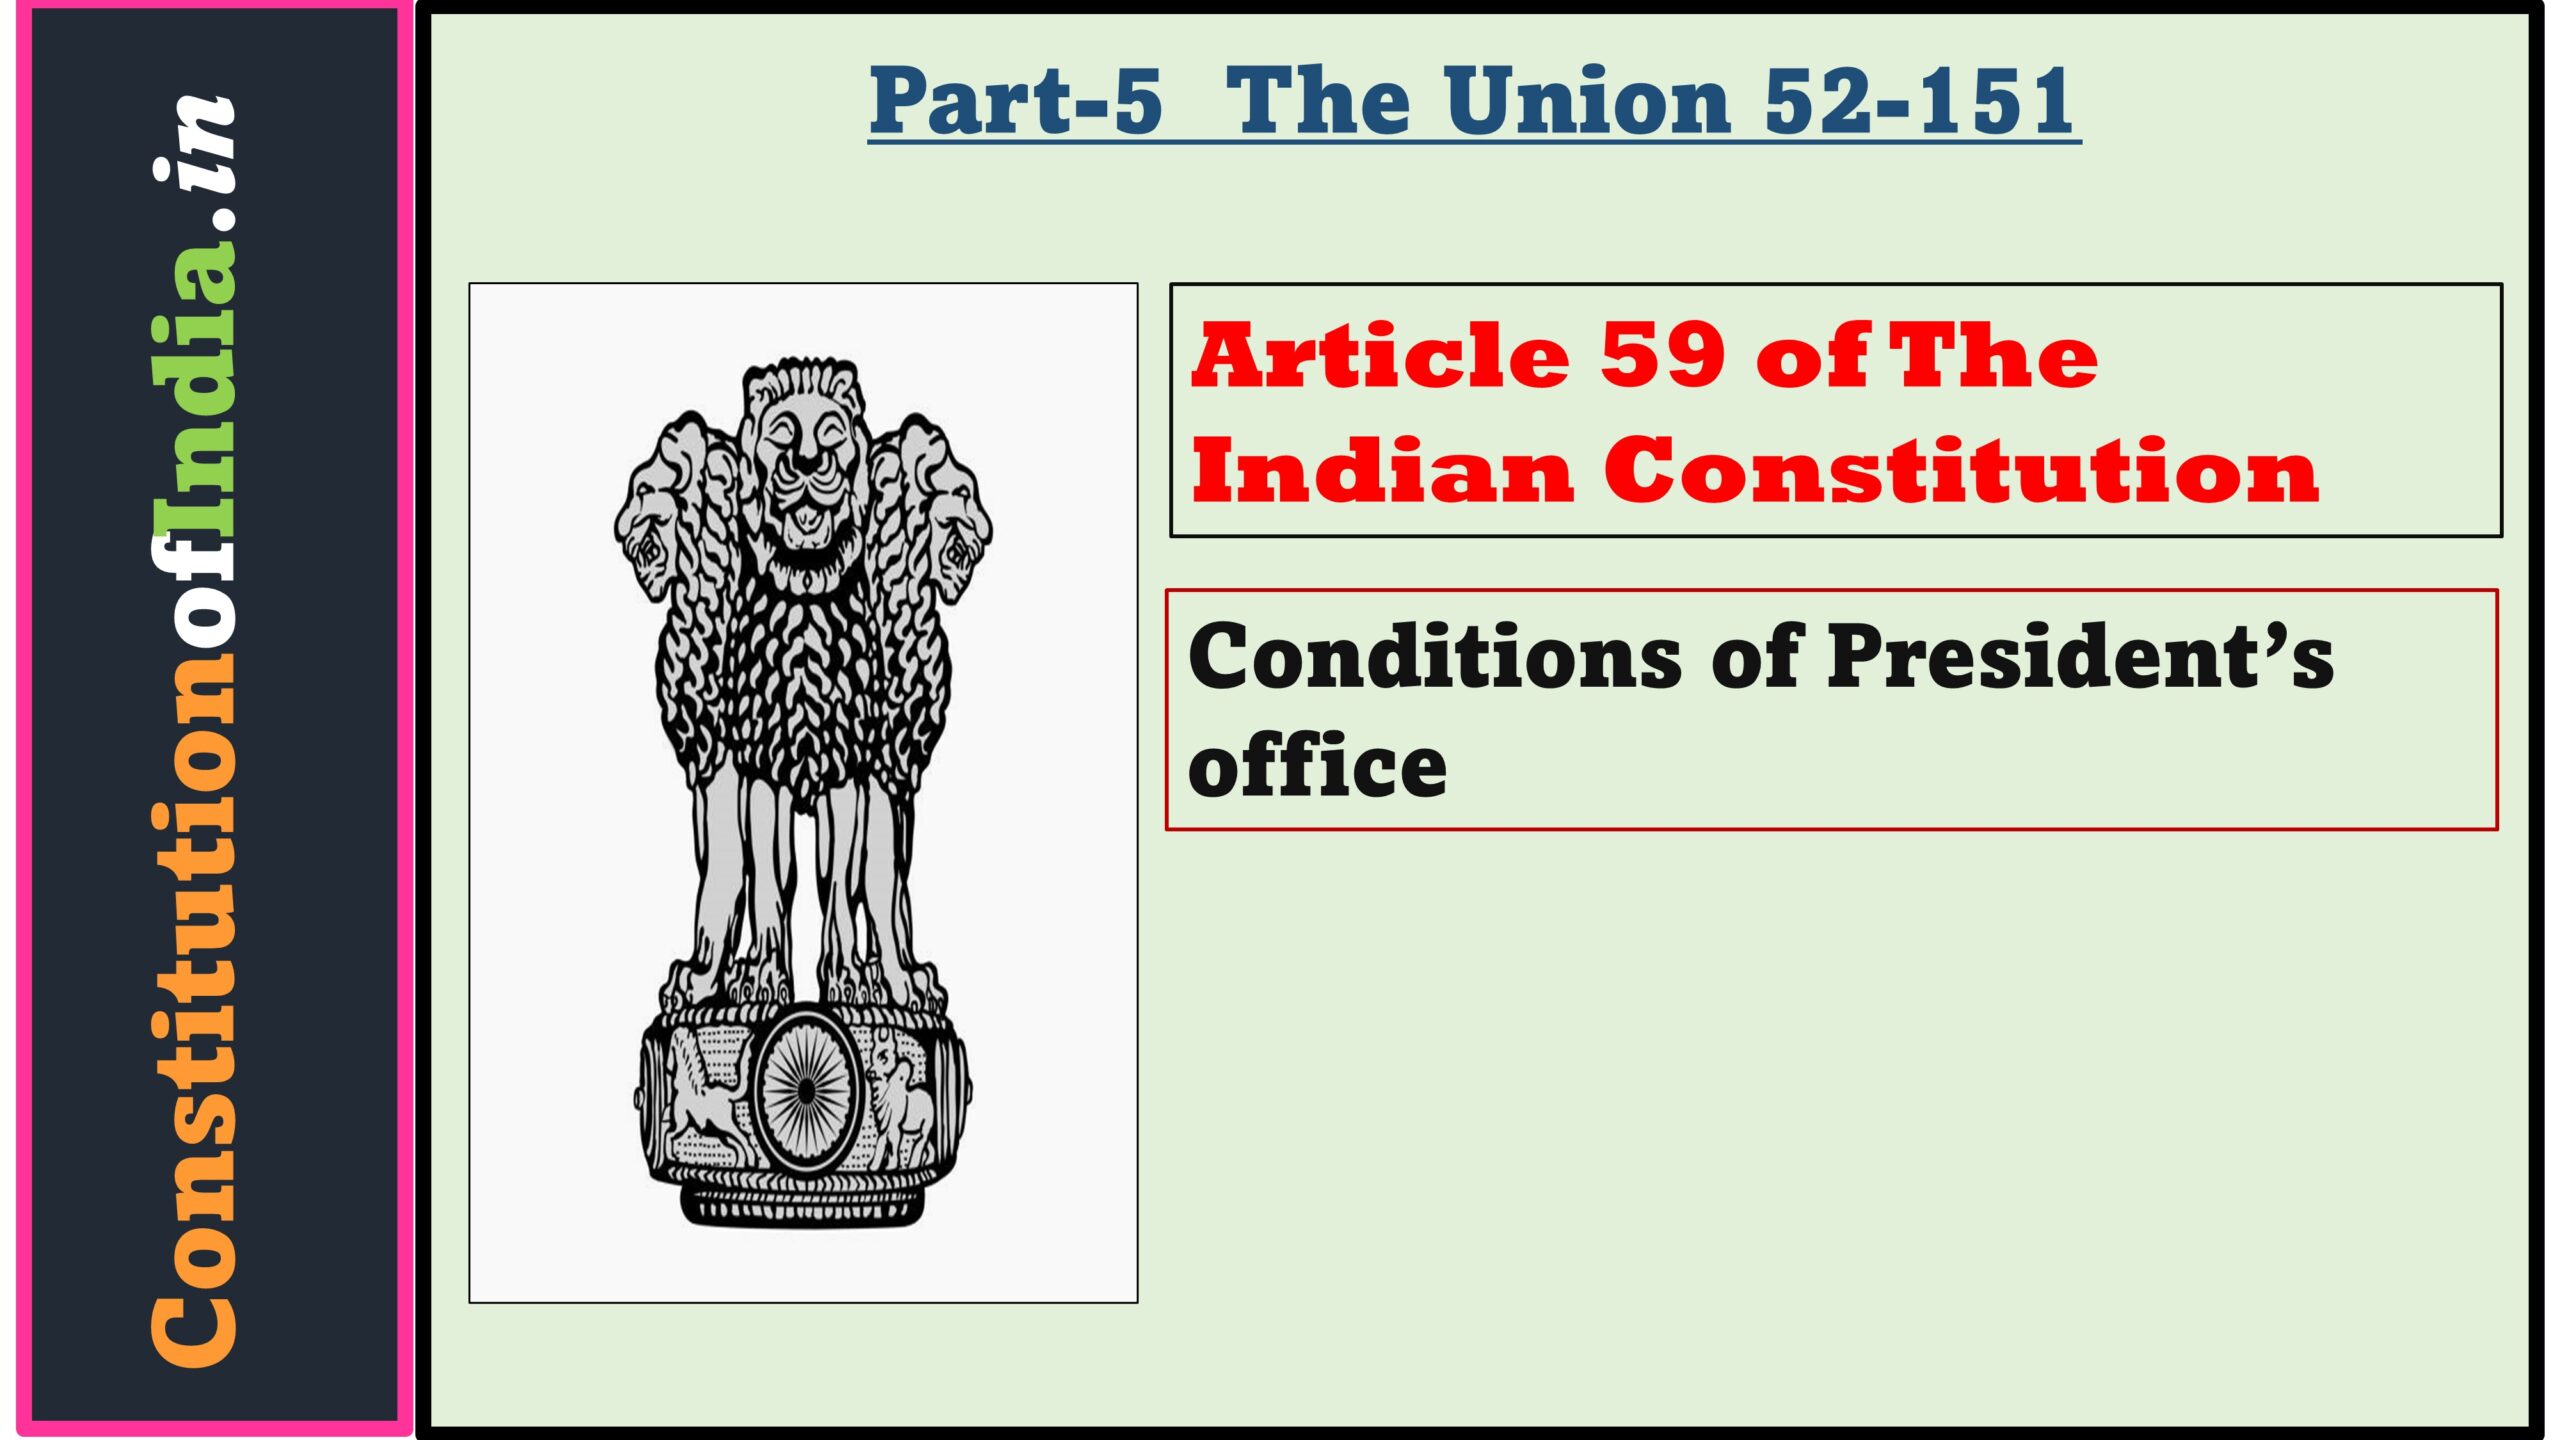 Article 59 of Indian Constitution